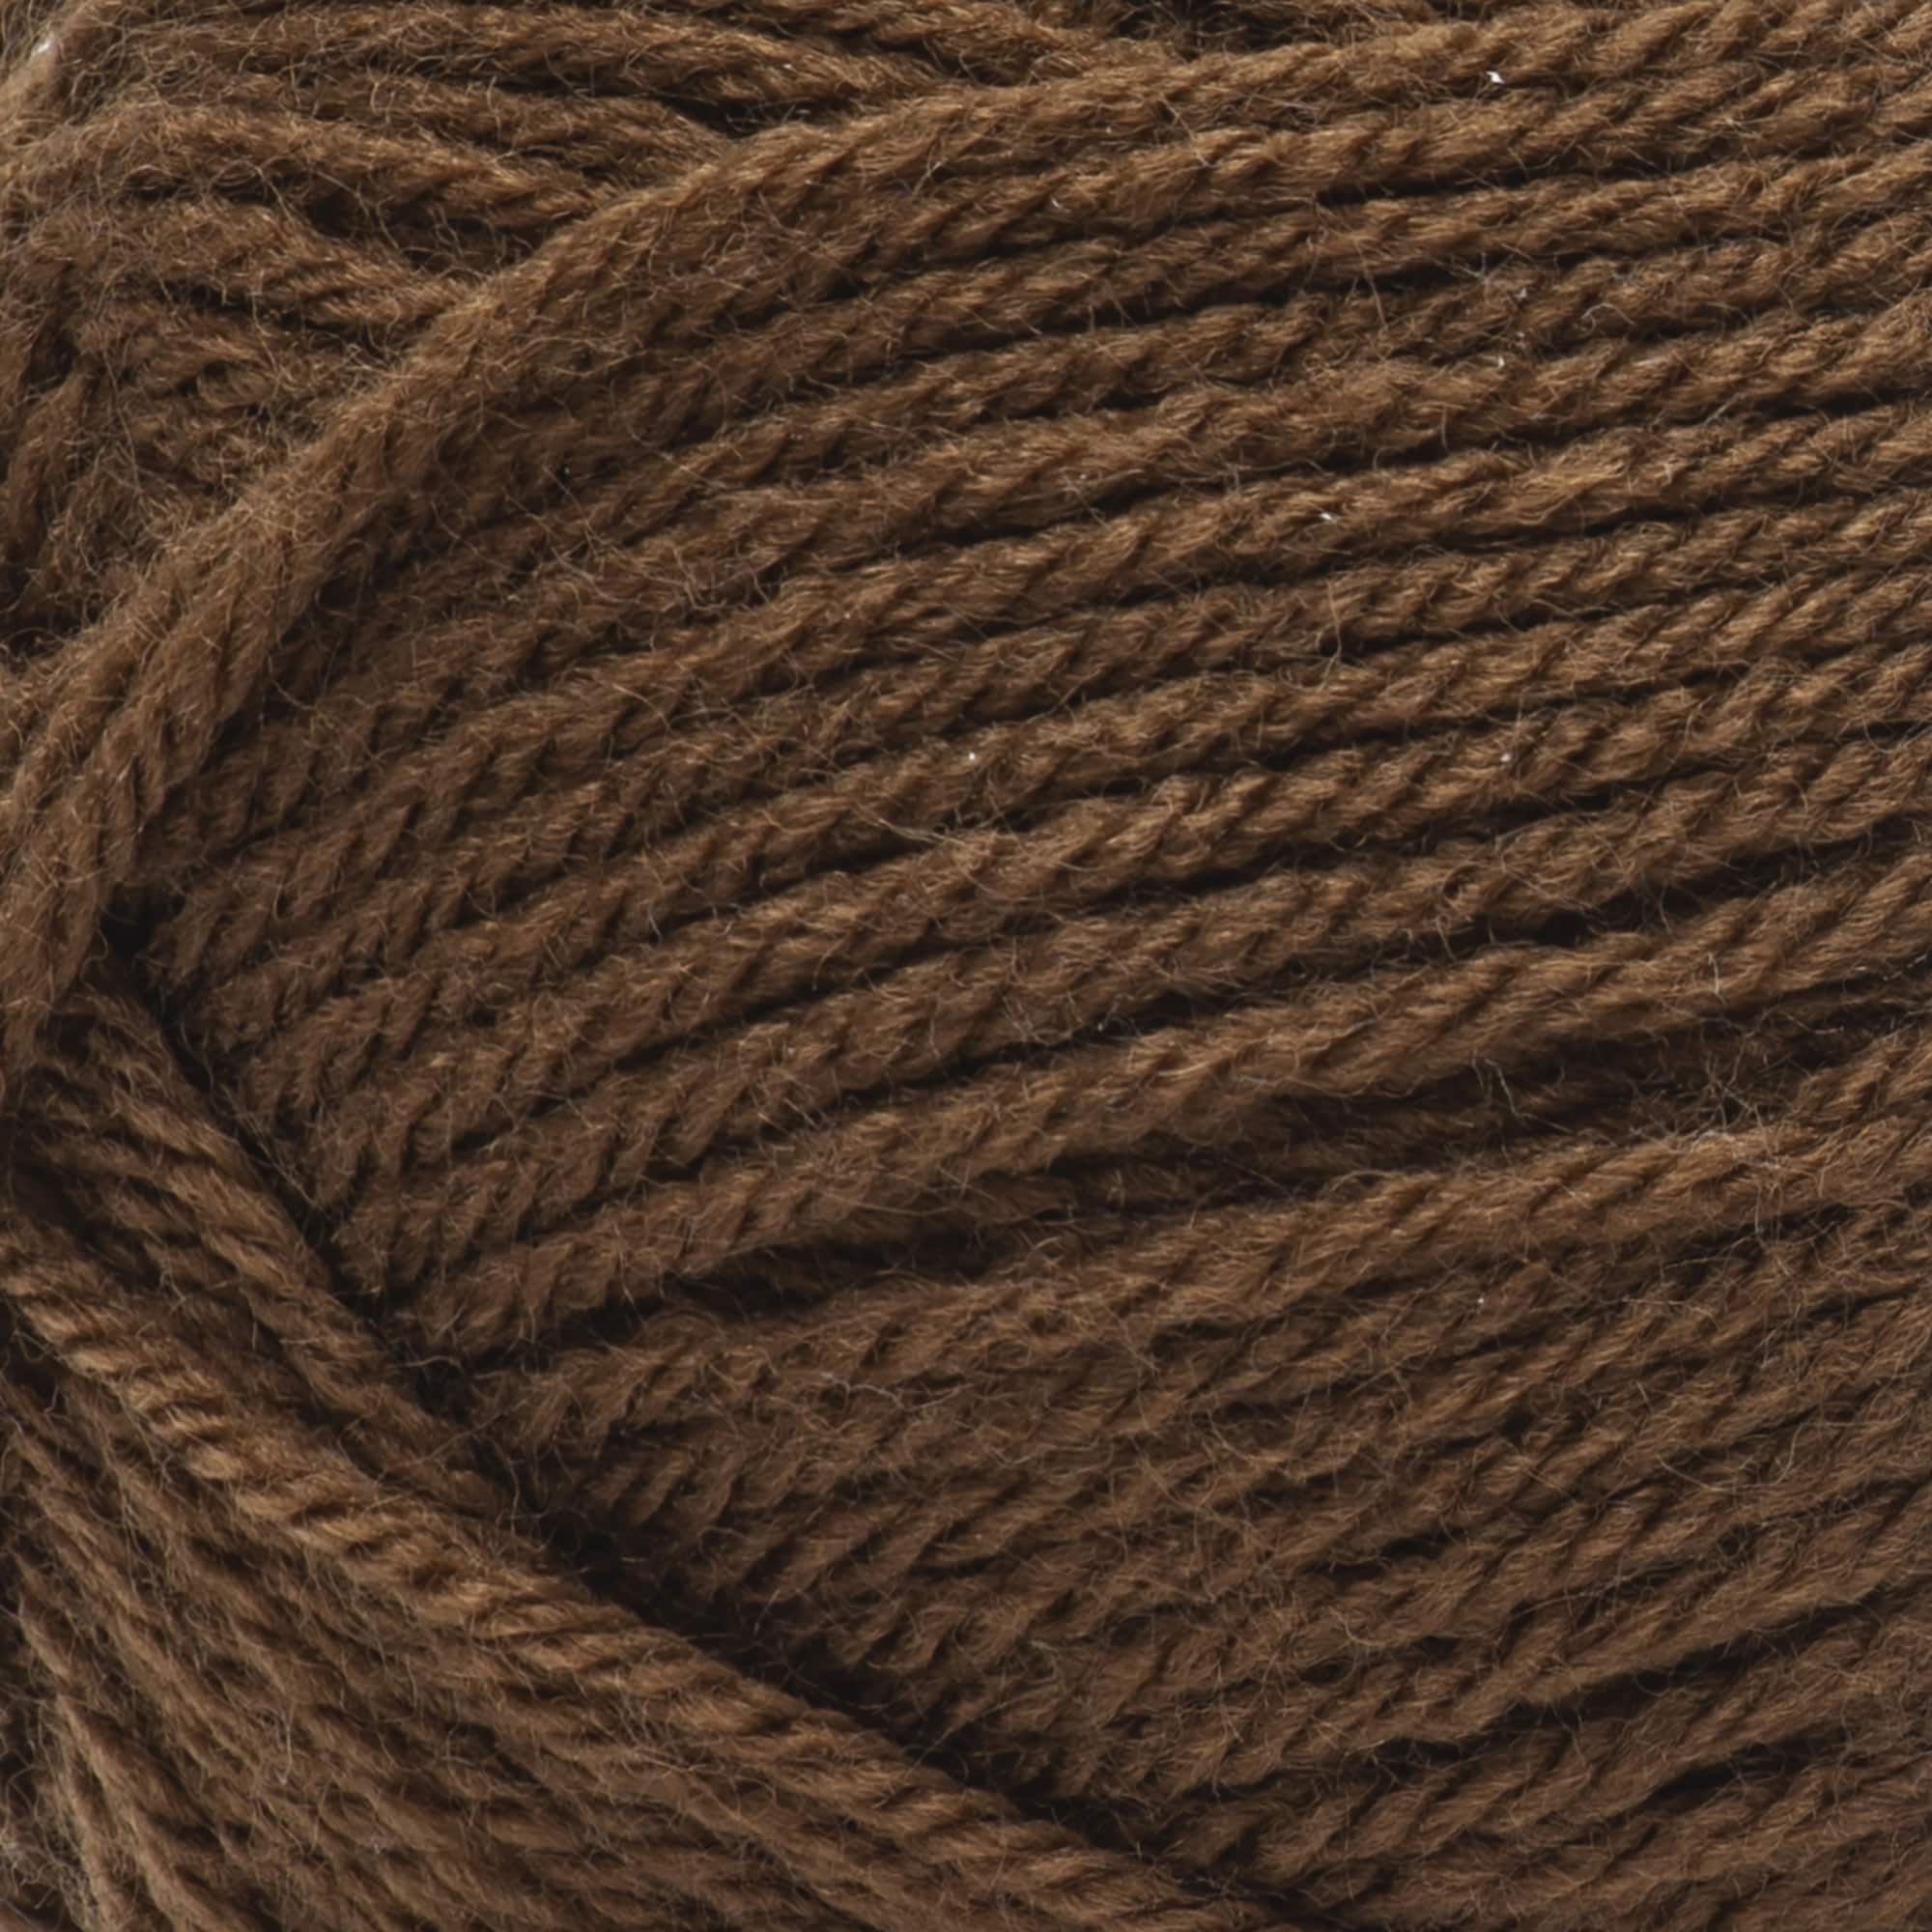 18 Pack: Impeccable® Solid Yarn by Loops & Threads®